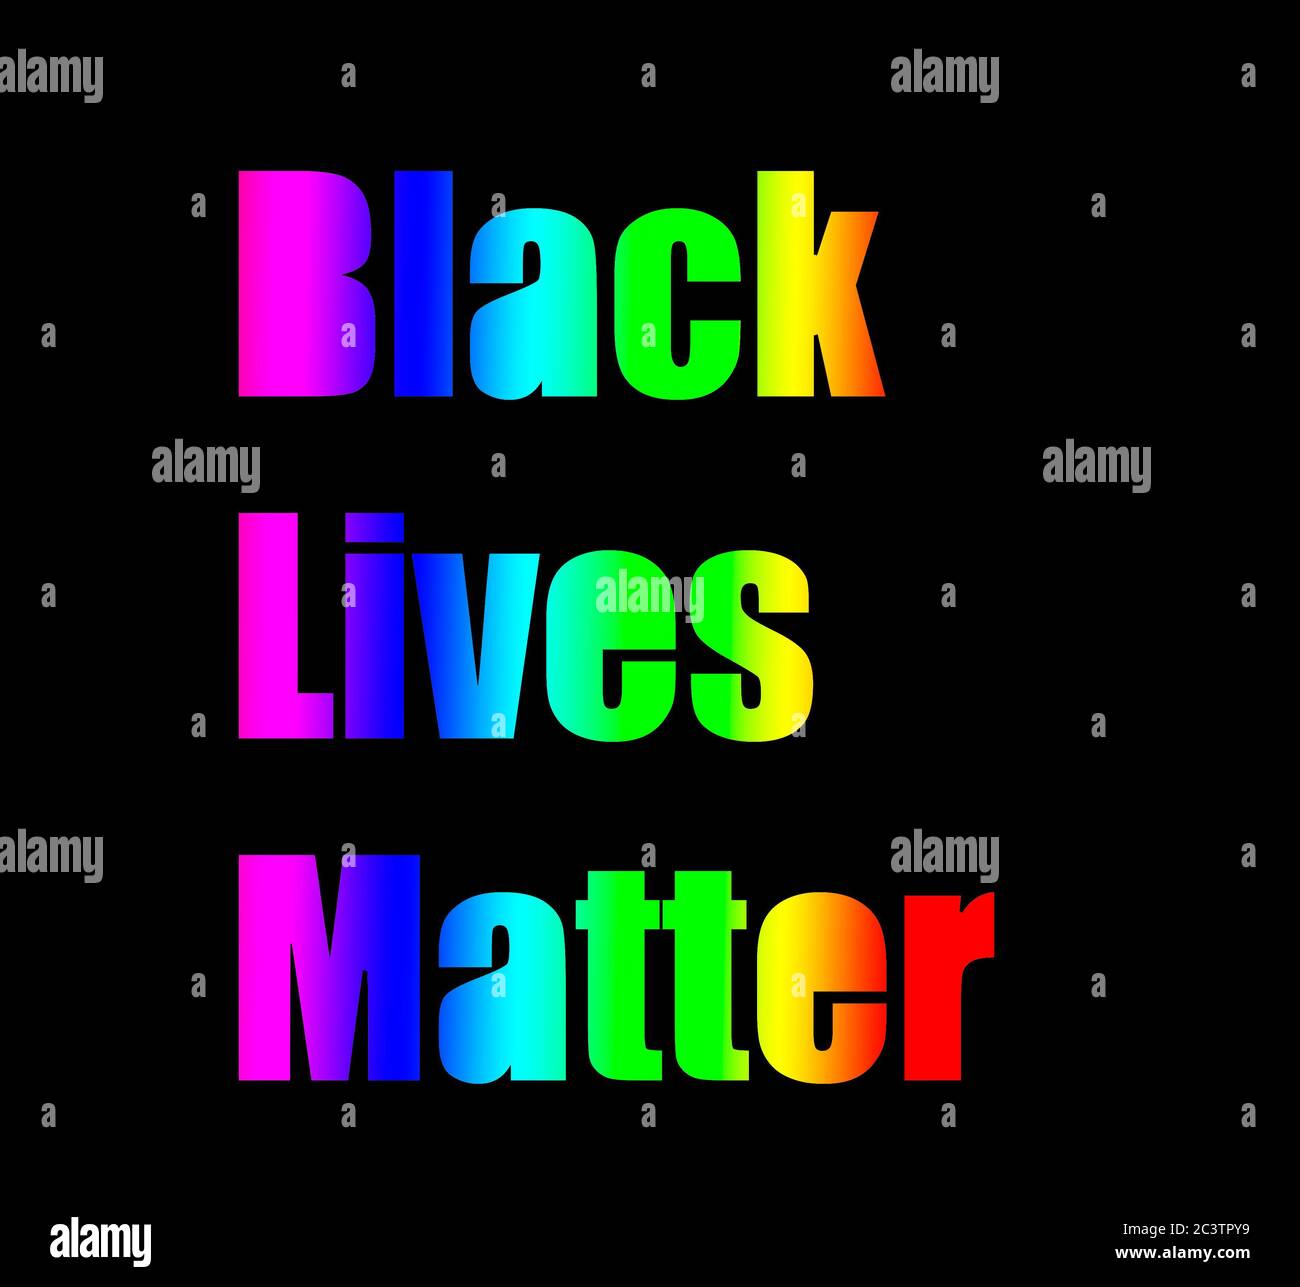 Black lives matter text and rainbow lettering card on dark background with White letters, Stock Photo